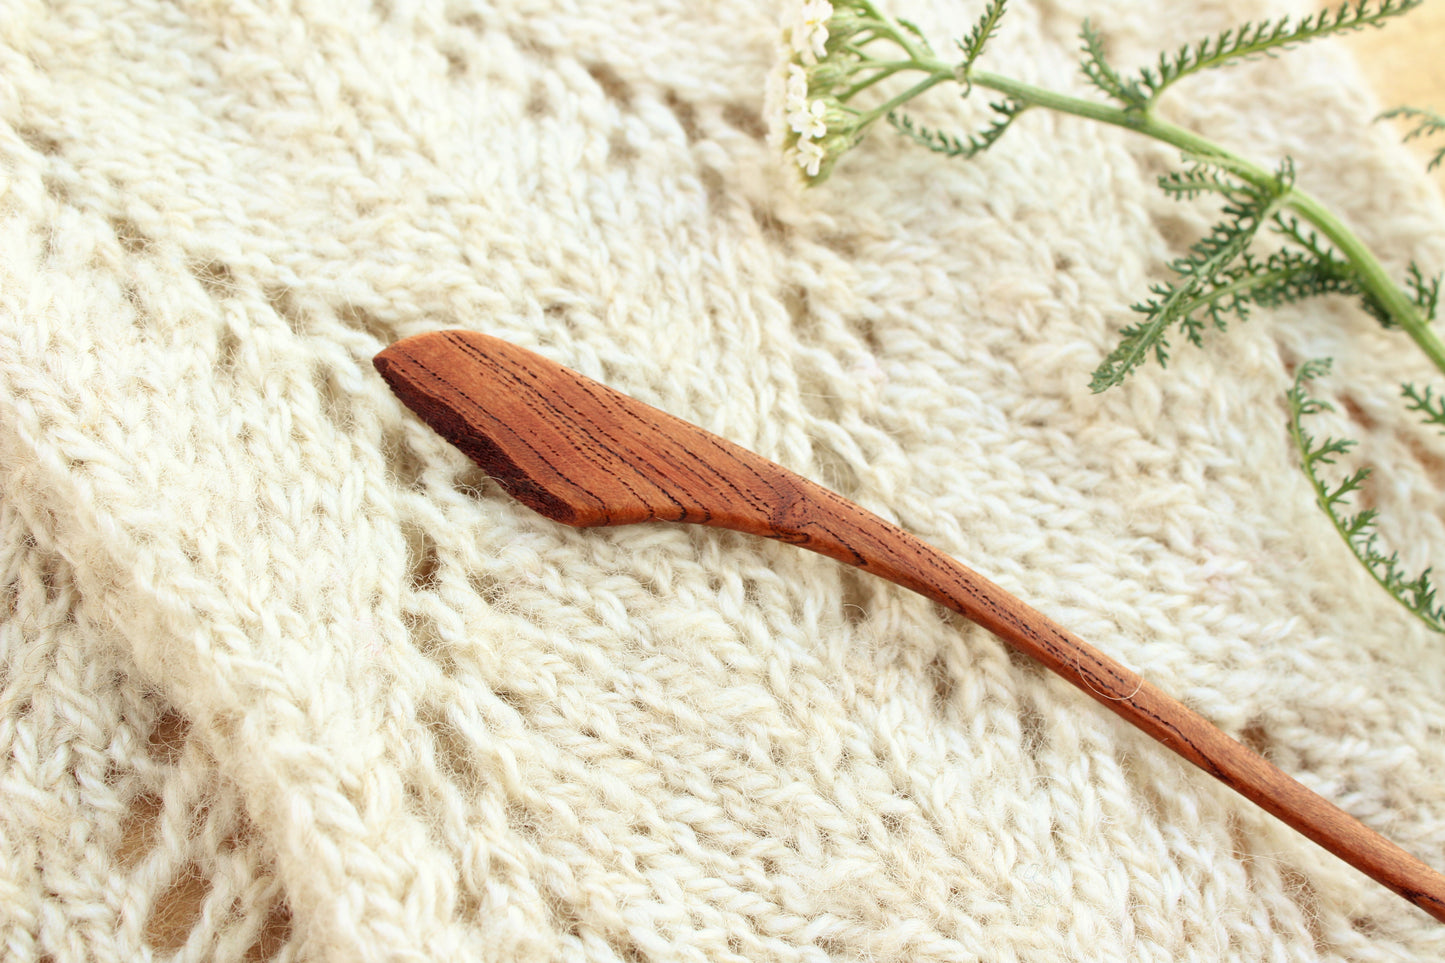 Live Edge Mineral Streaked Cherry Sweater + Shawl Pin